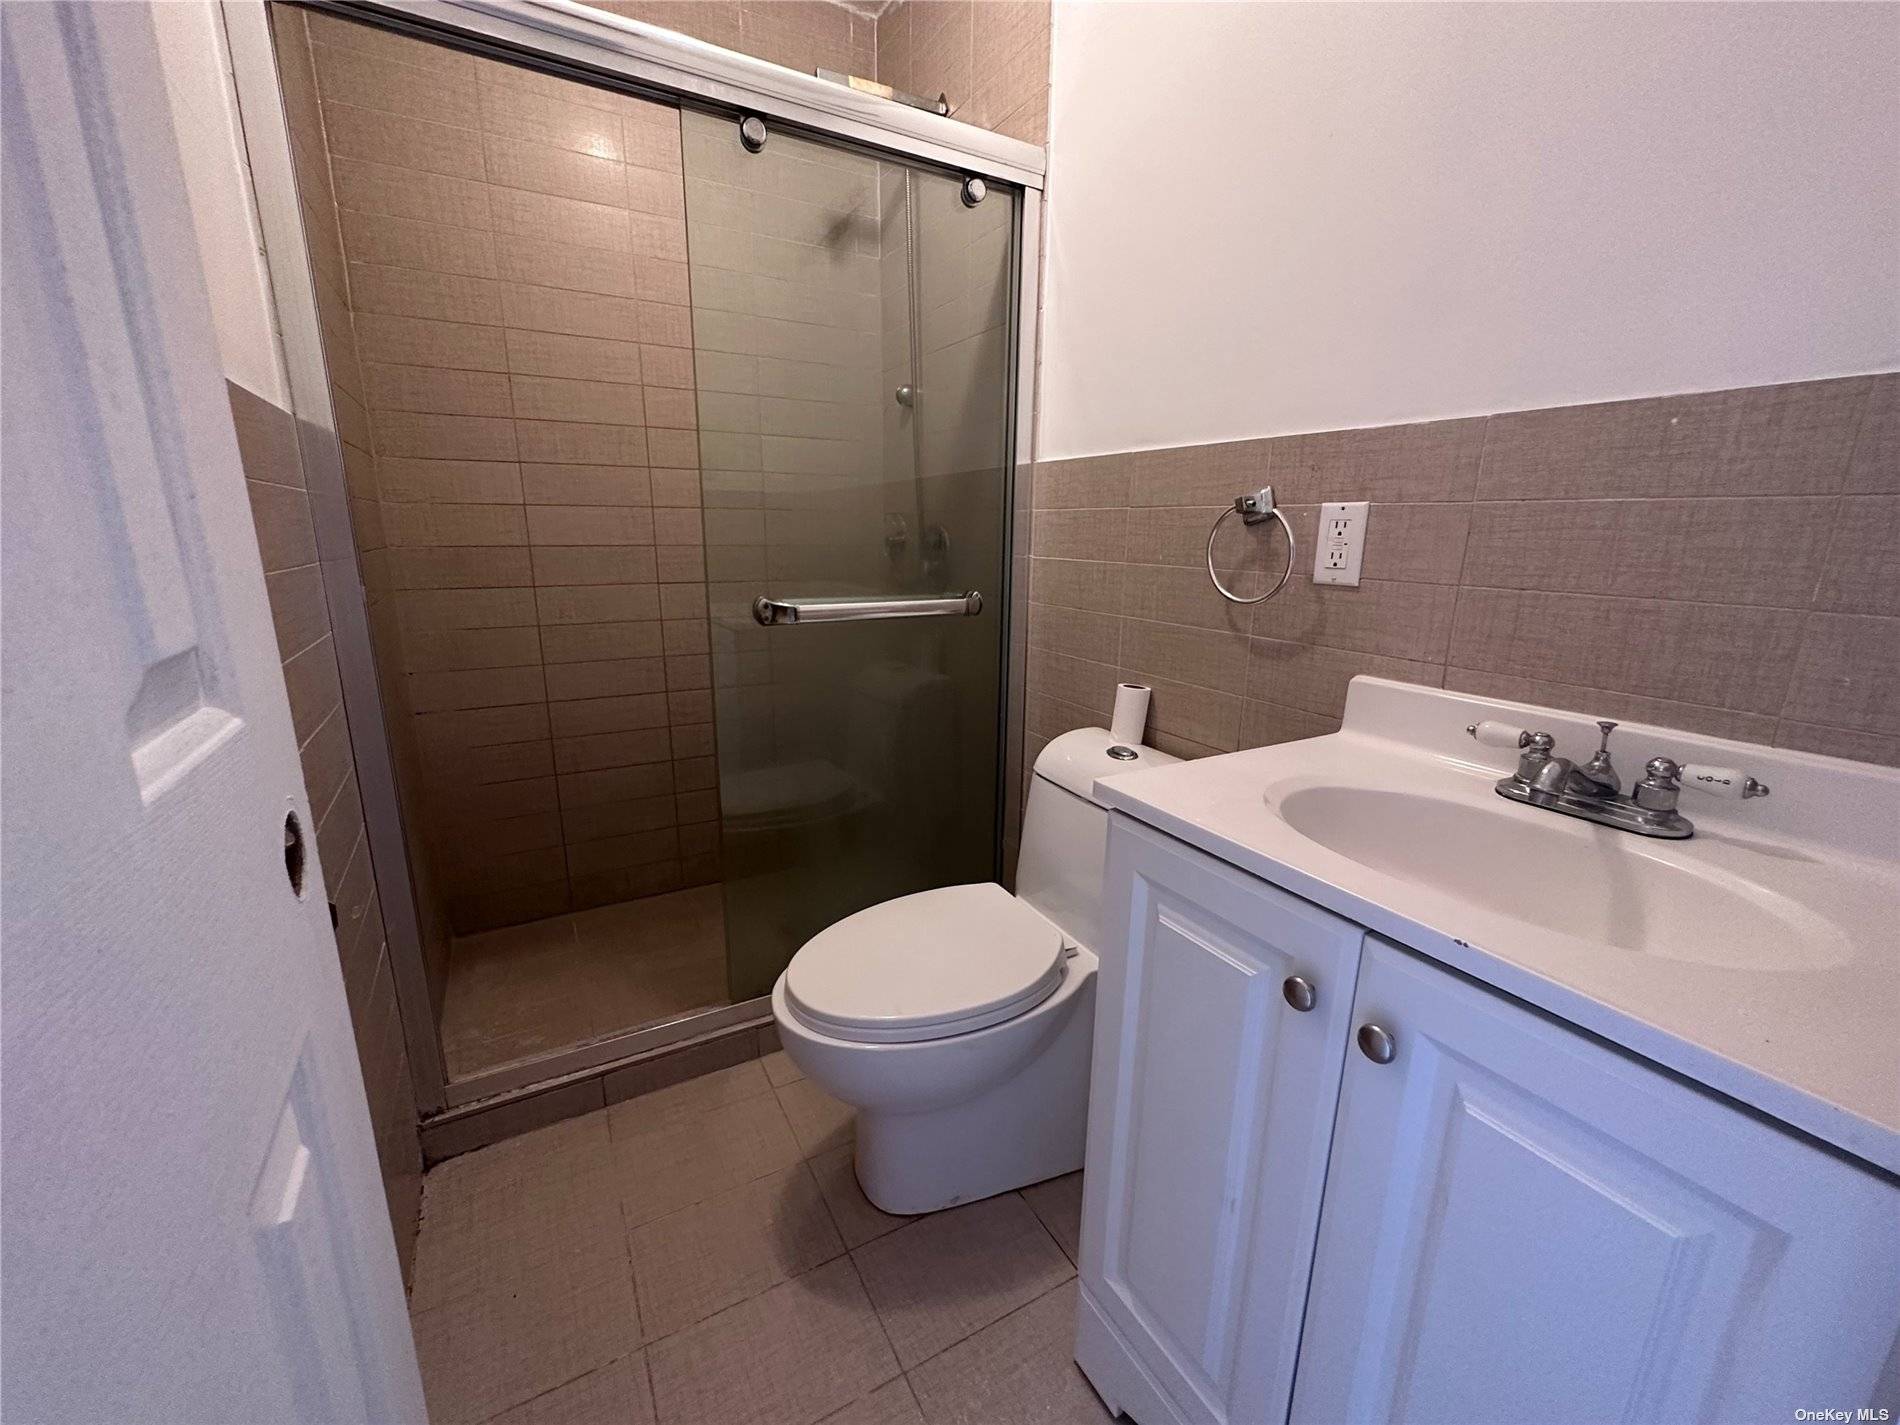 Welcome to a newly renovated, 3 bedroom, 2 full bath duplex unit located in Far Rockaway.